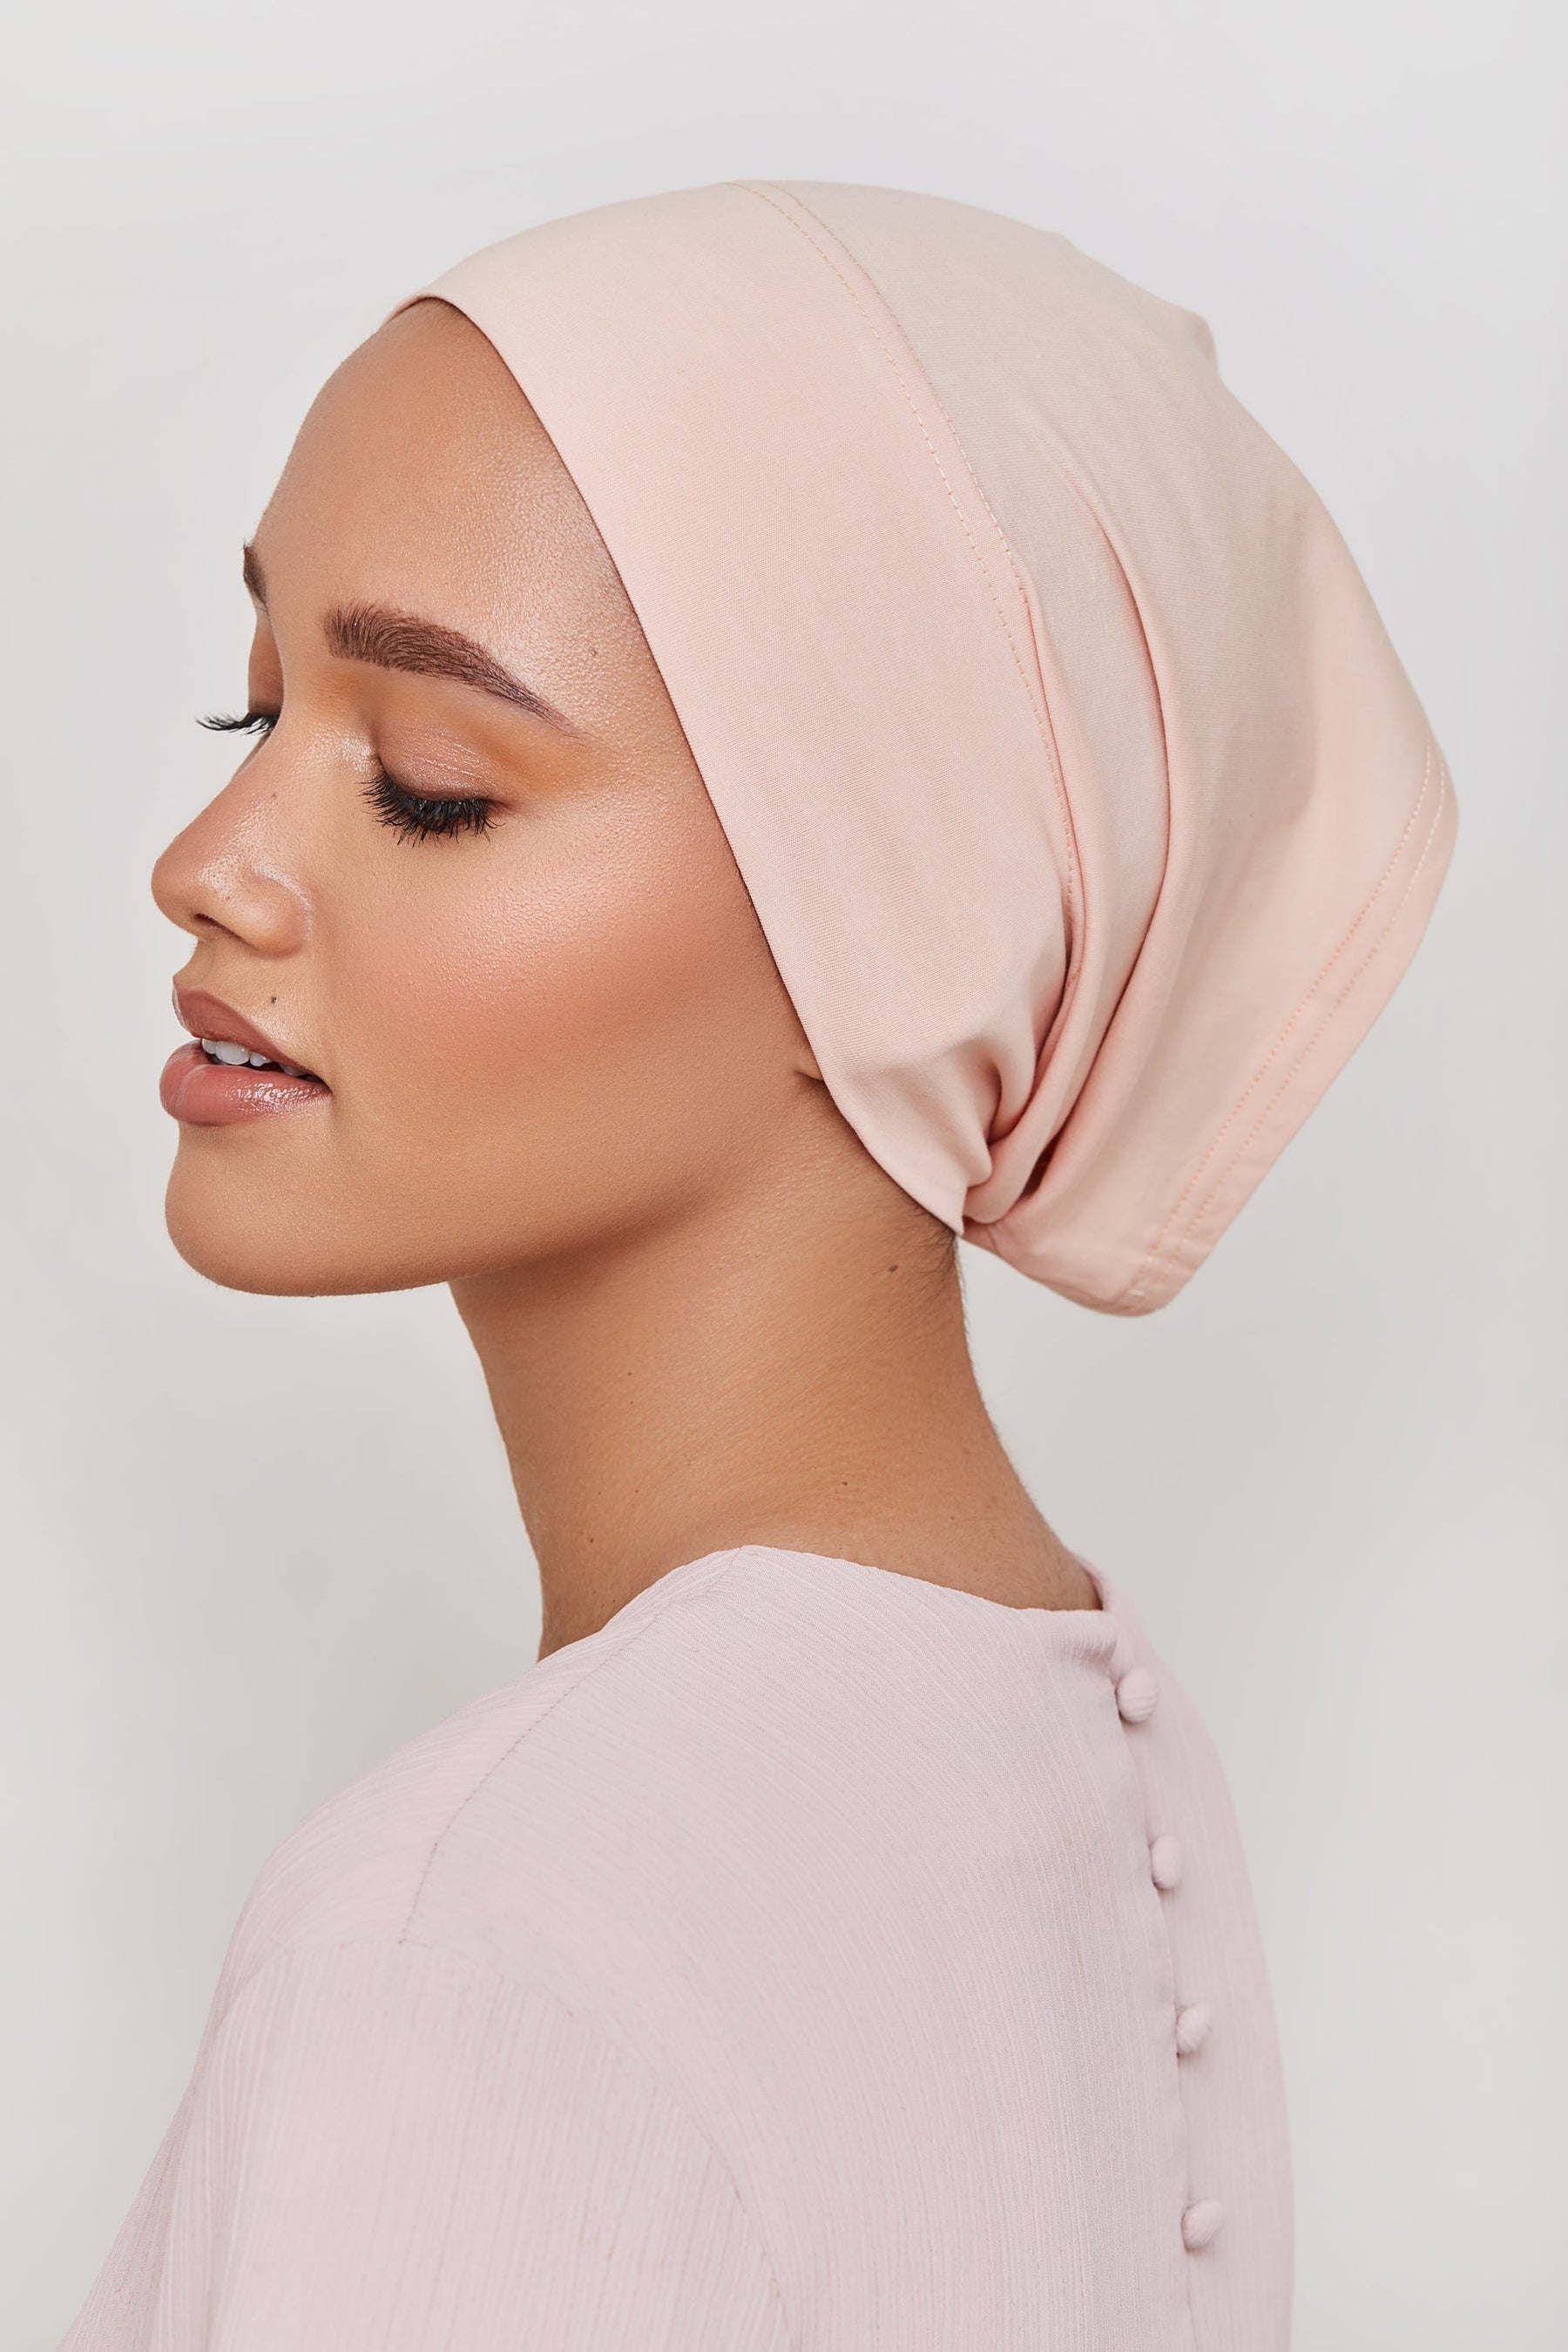 Cotton Undercap - Almost Apricot Veiled Collection 